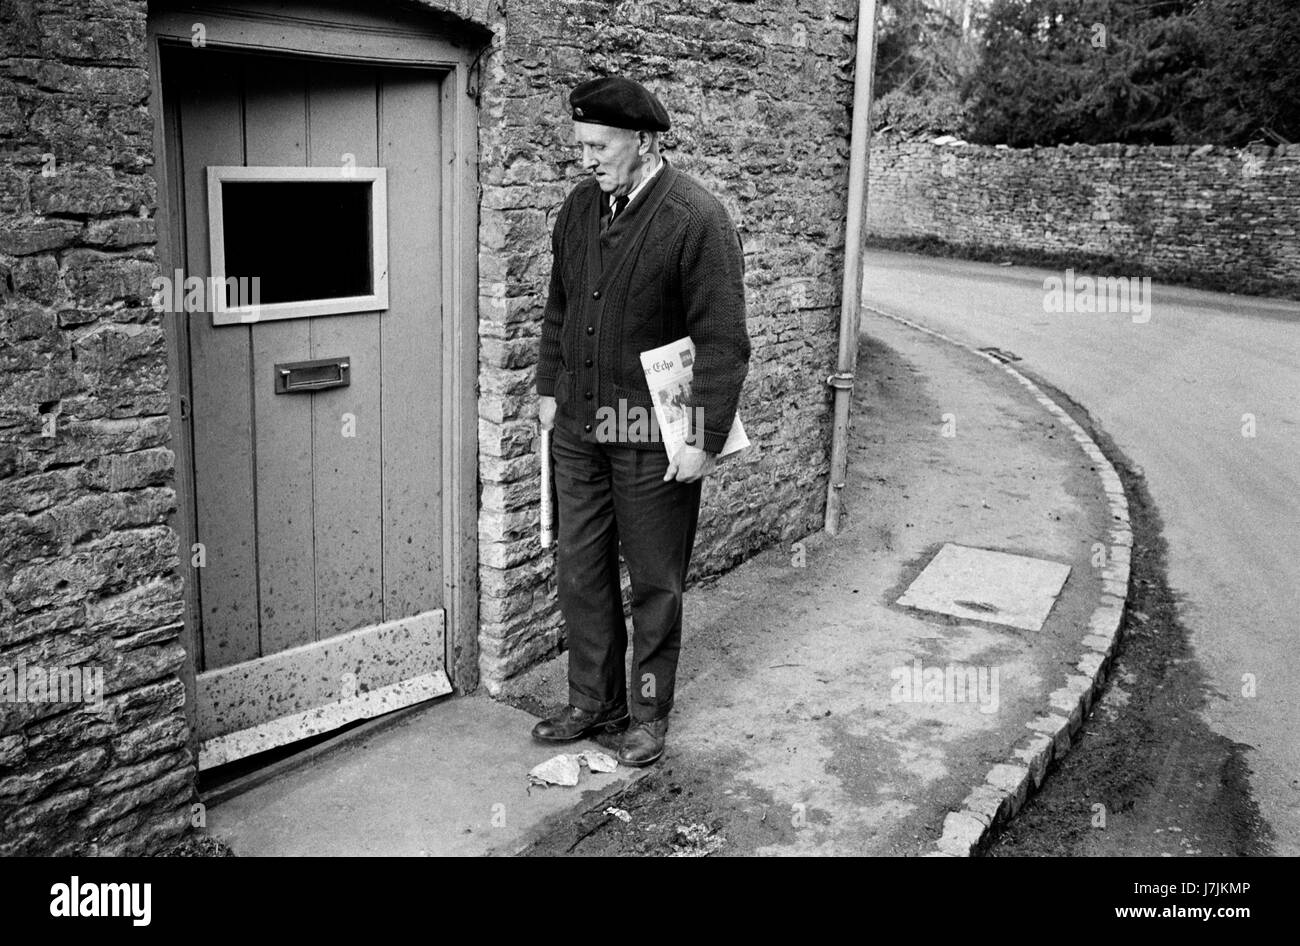 1970s Britain UK. Village life 1975 Newspaper delivery man, Sunday morning. The Cotswolds. Lower and Upper Slaughter are twin villages on the River Eye and are know as The Slaughters.  1975 HOMER SYKES Stock Photo